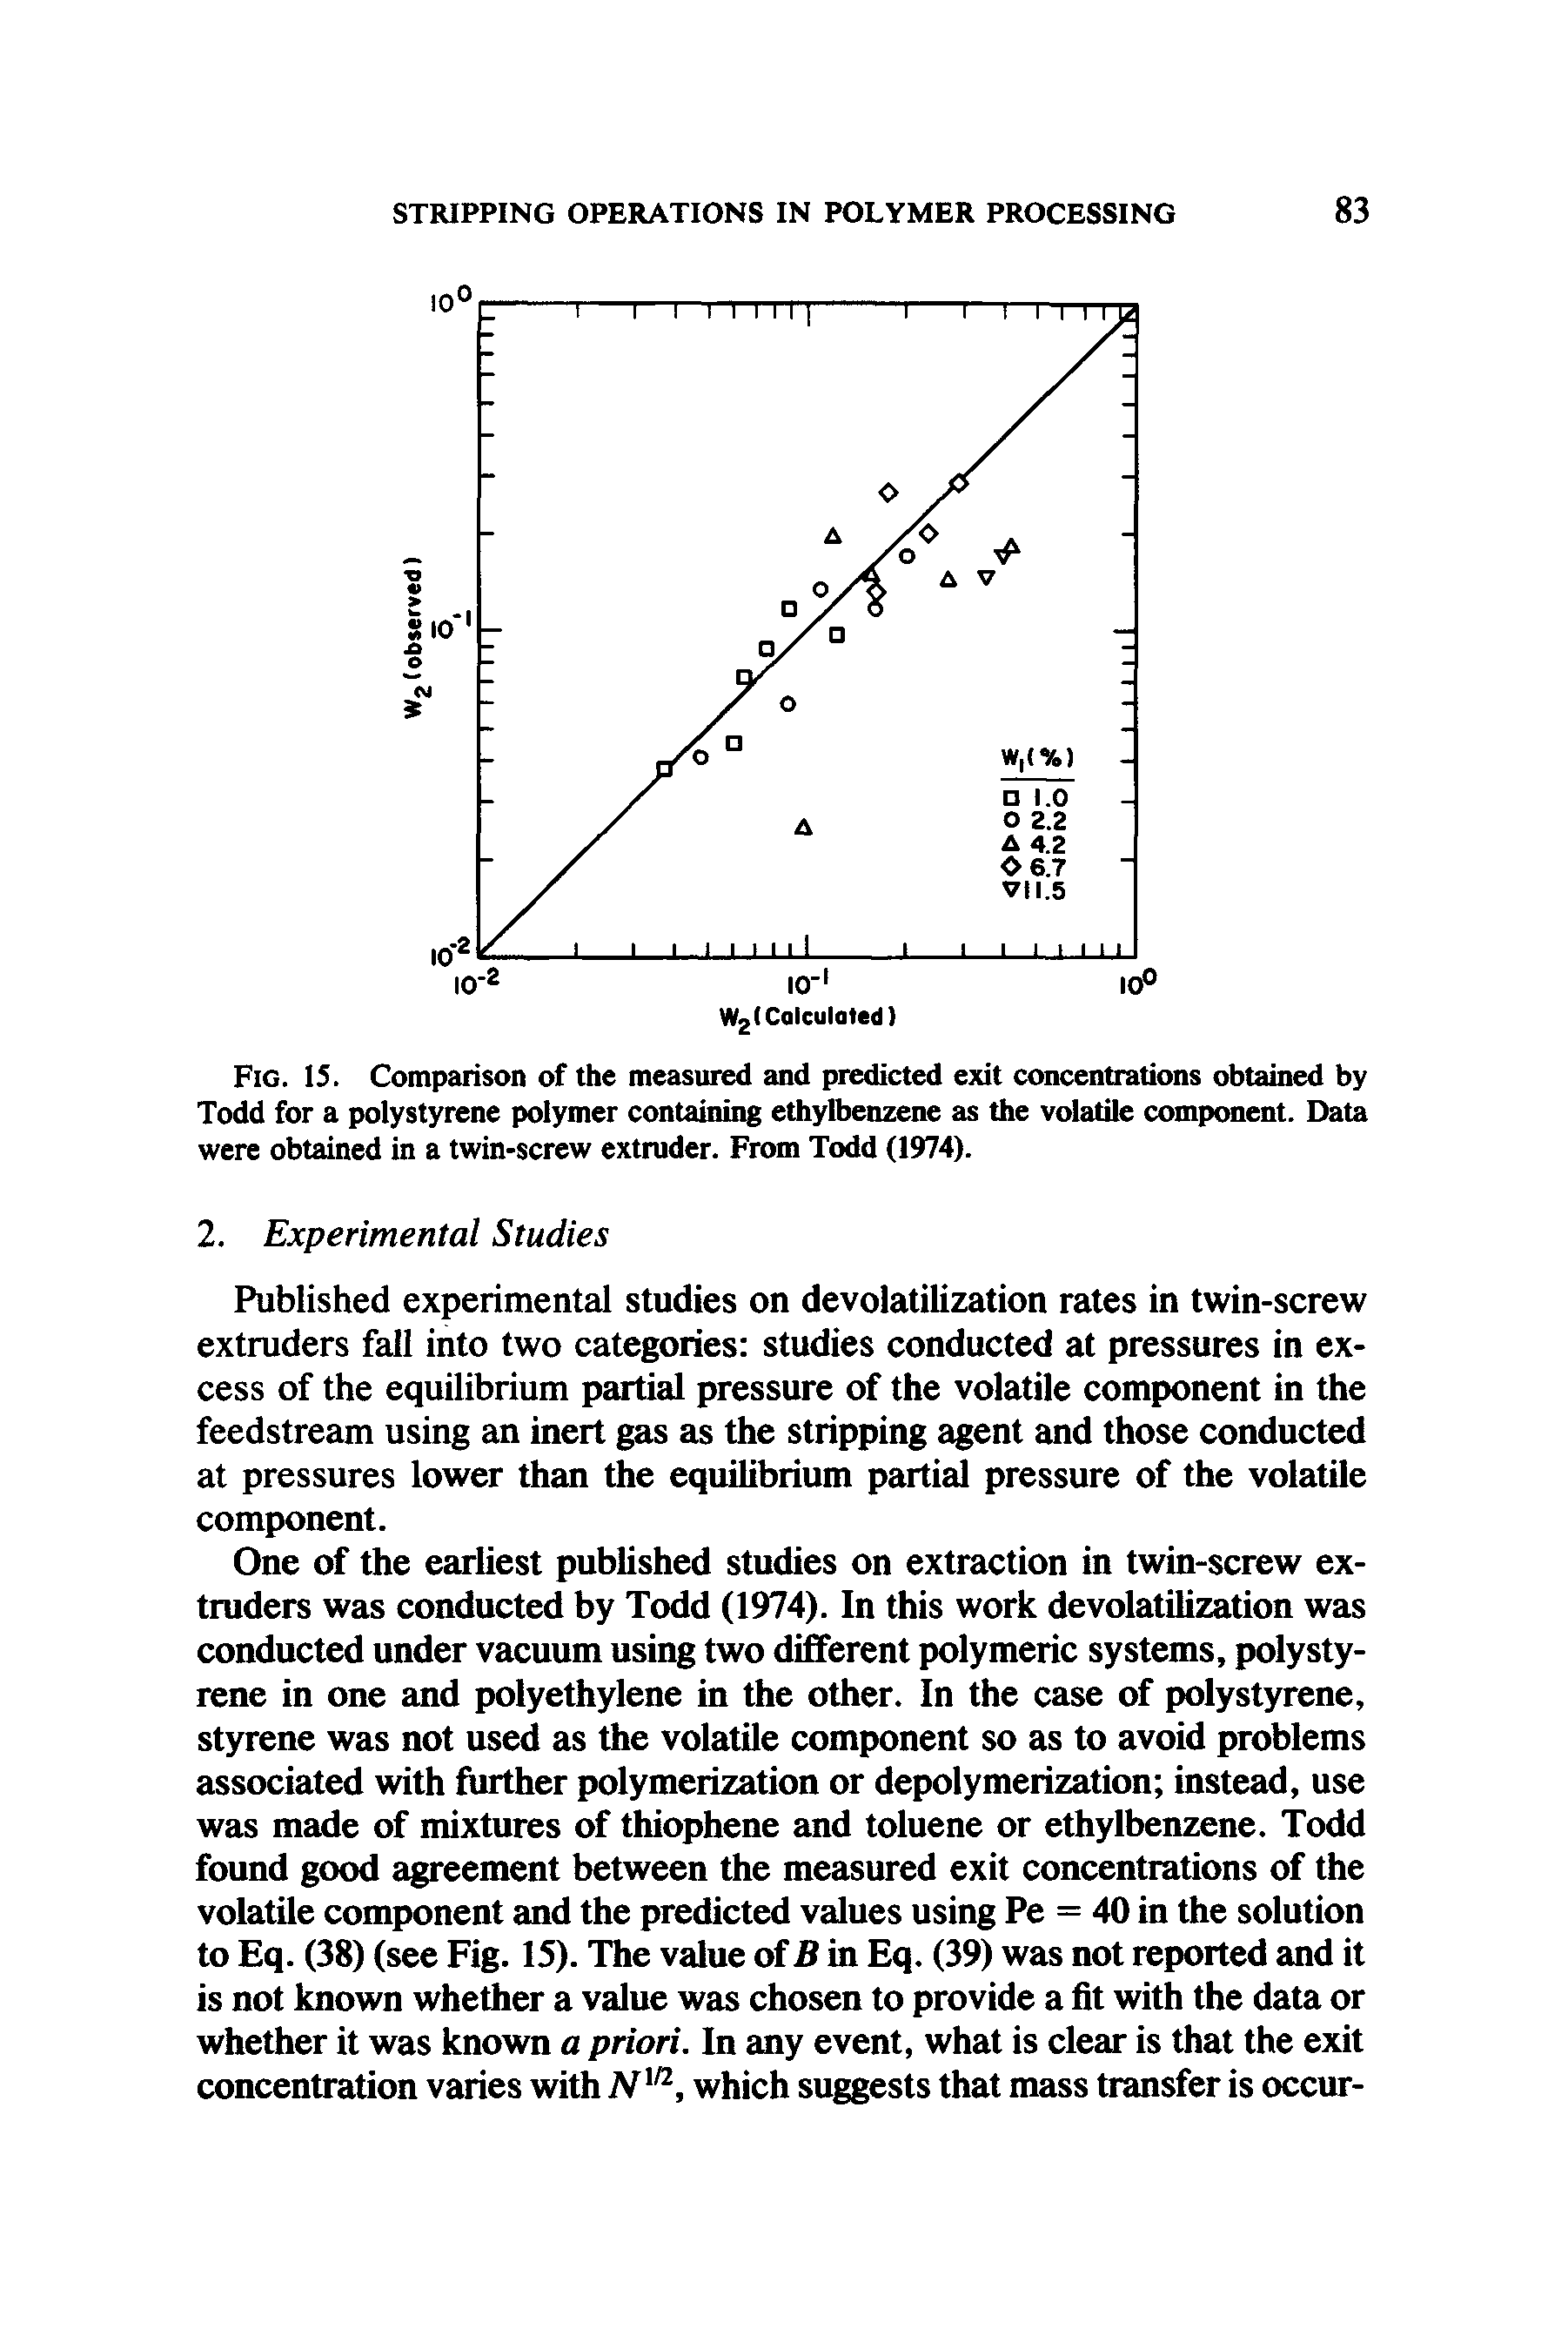 Fig. 15. Comparison of the measured and predicted exit concentrations obtained by Todd for a polystyrene polymer containing ethylbenzene as the volatile component. Data were obtained in a twin-screw extruder. From Todd (1974).